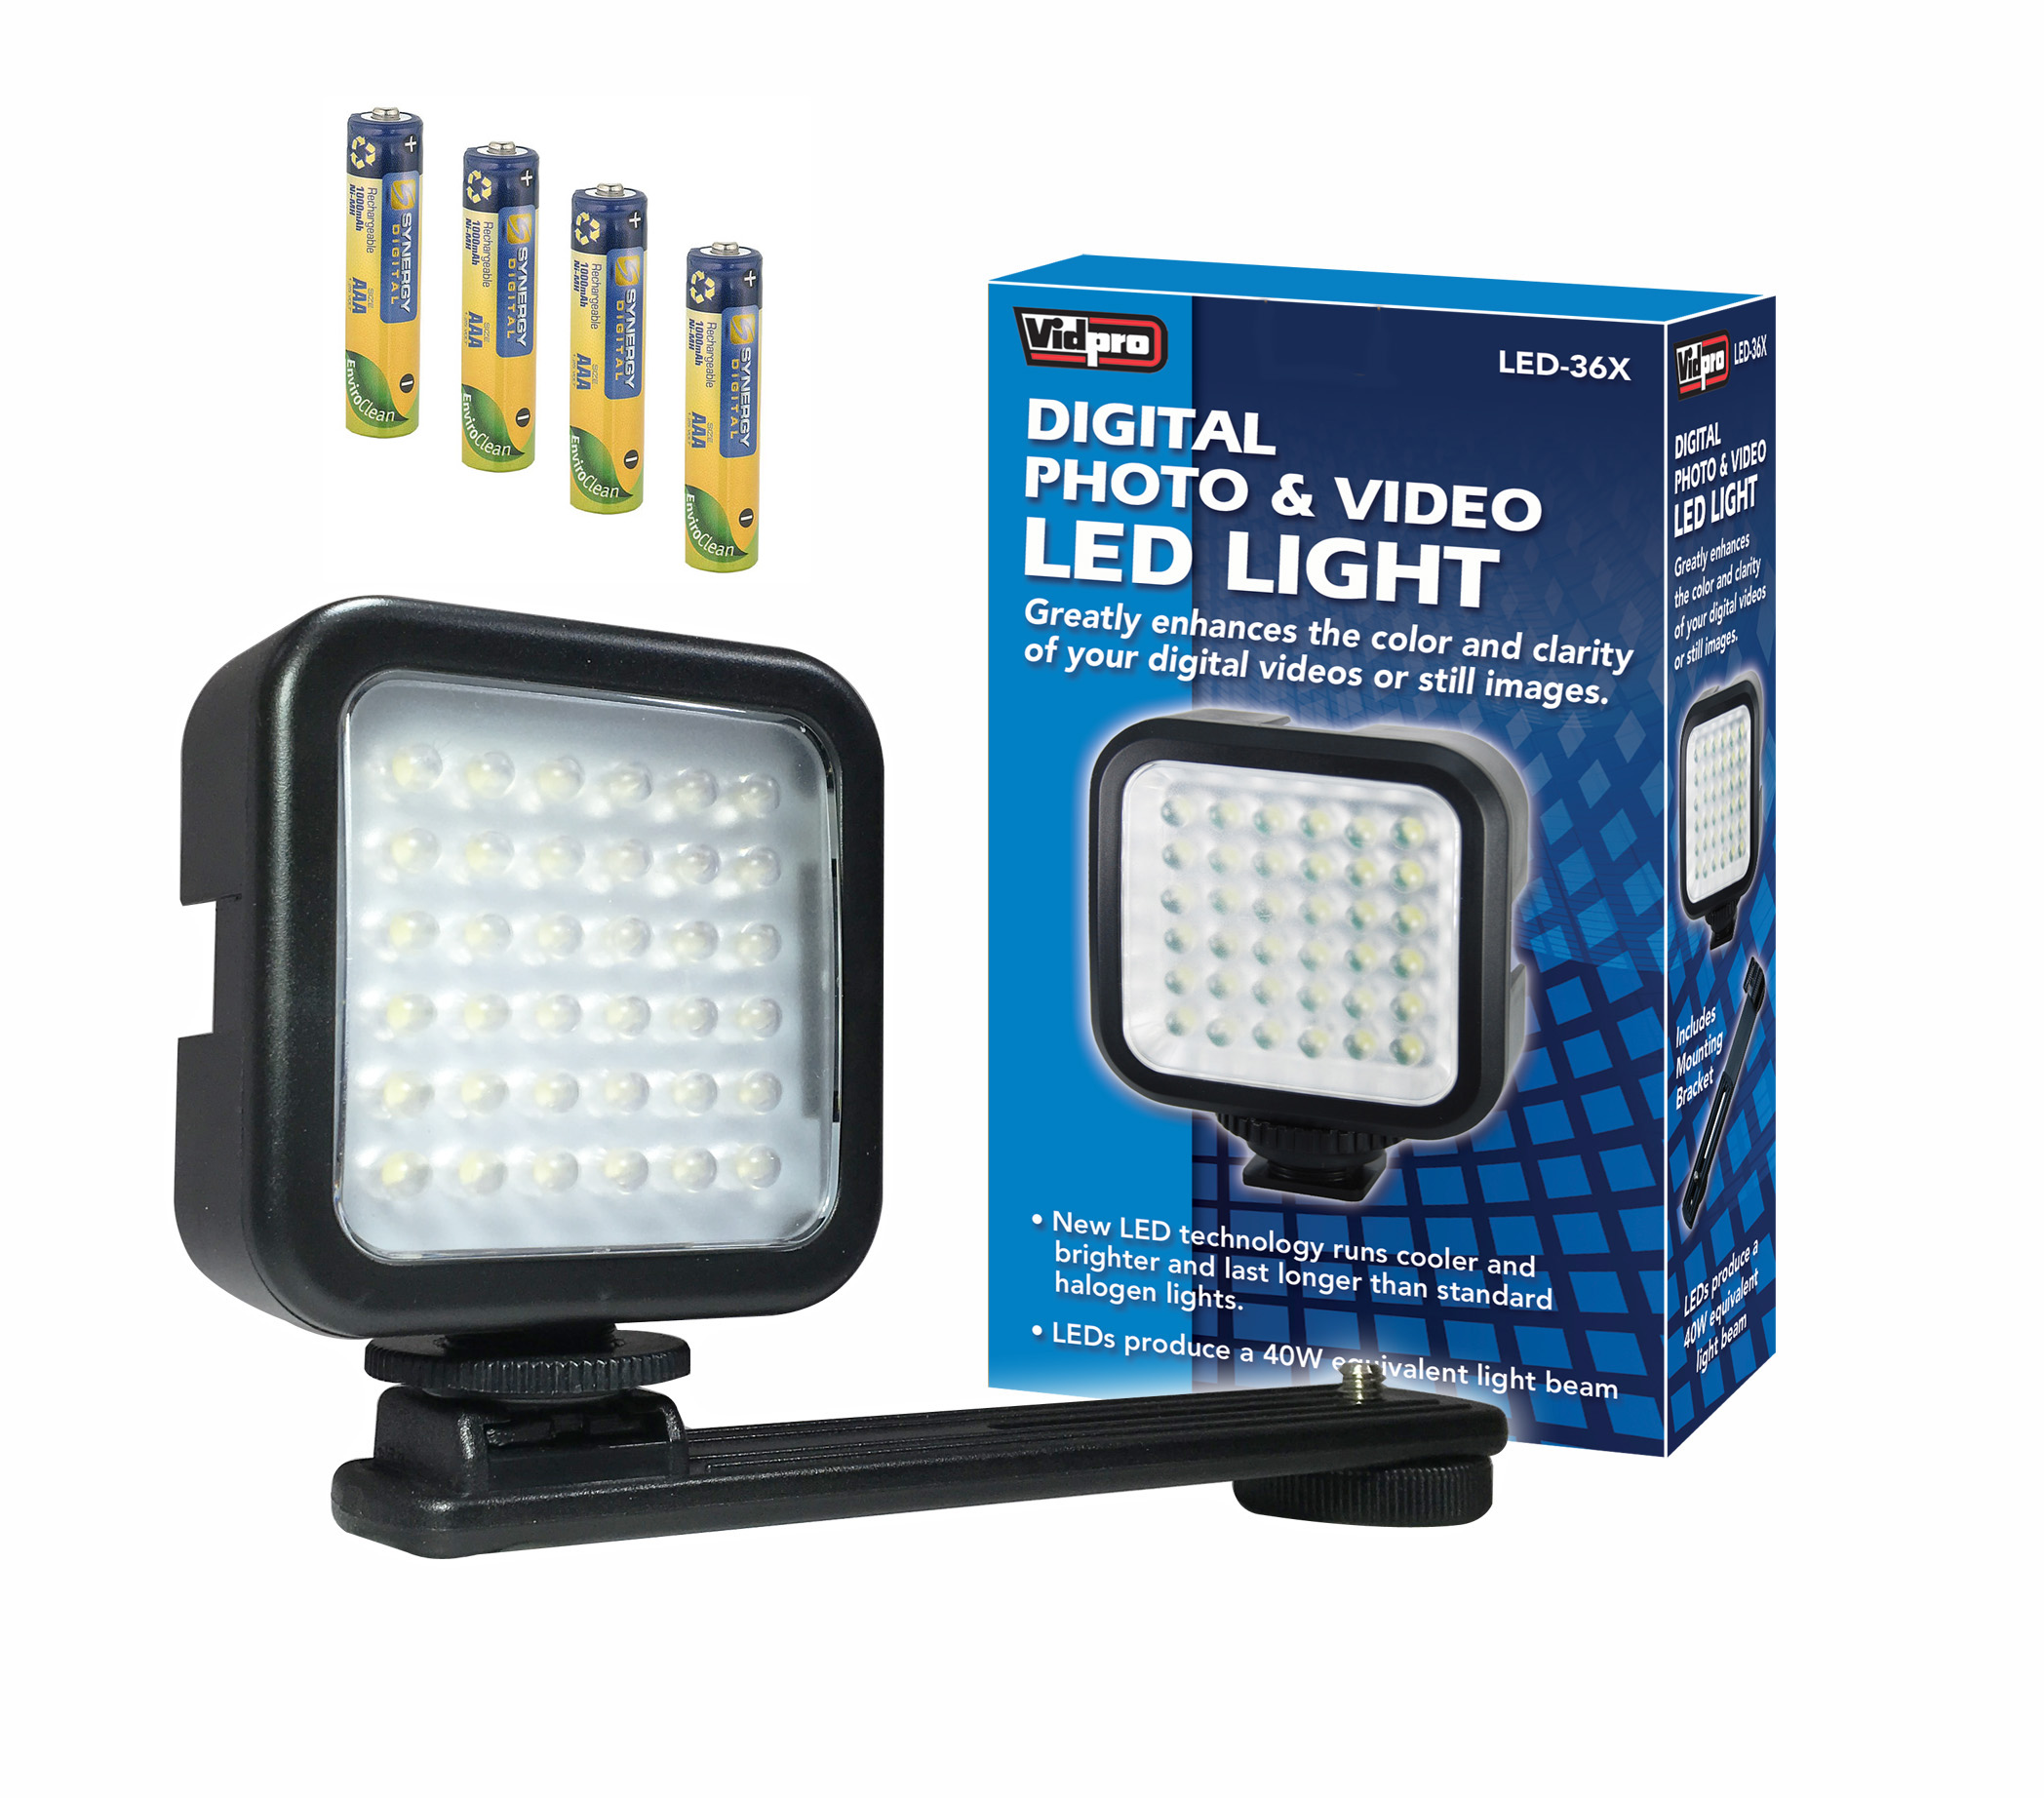 LED-36X On-Camera LED Video Light - With a Pack of 4 AAA NiMH Rechargable Batteries - 1000mAh